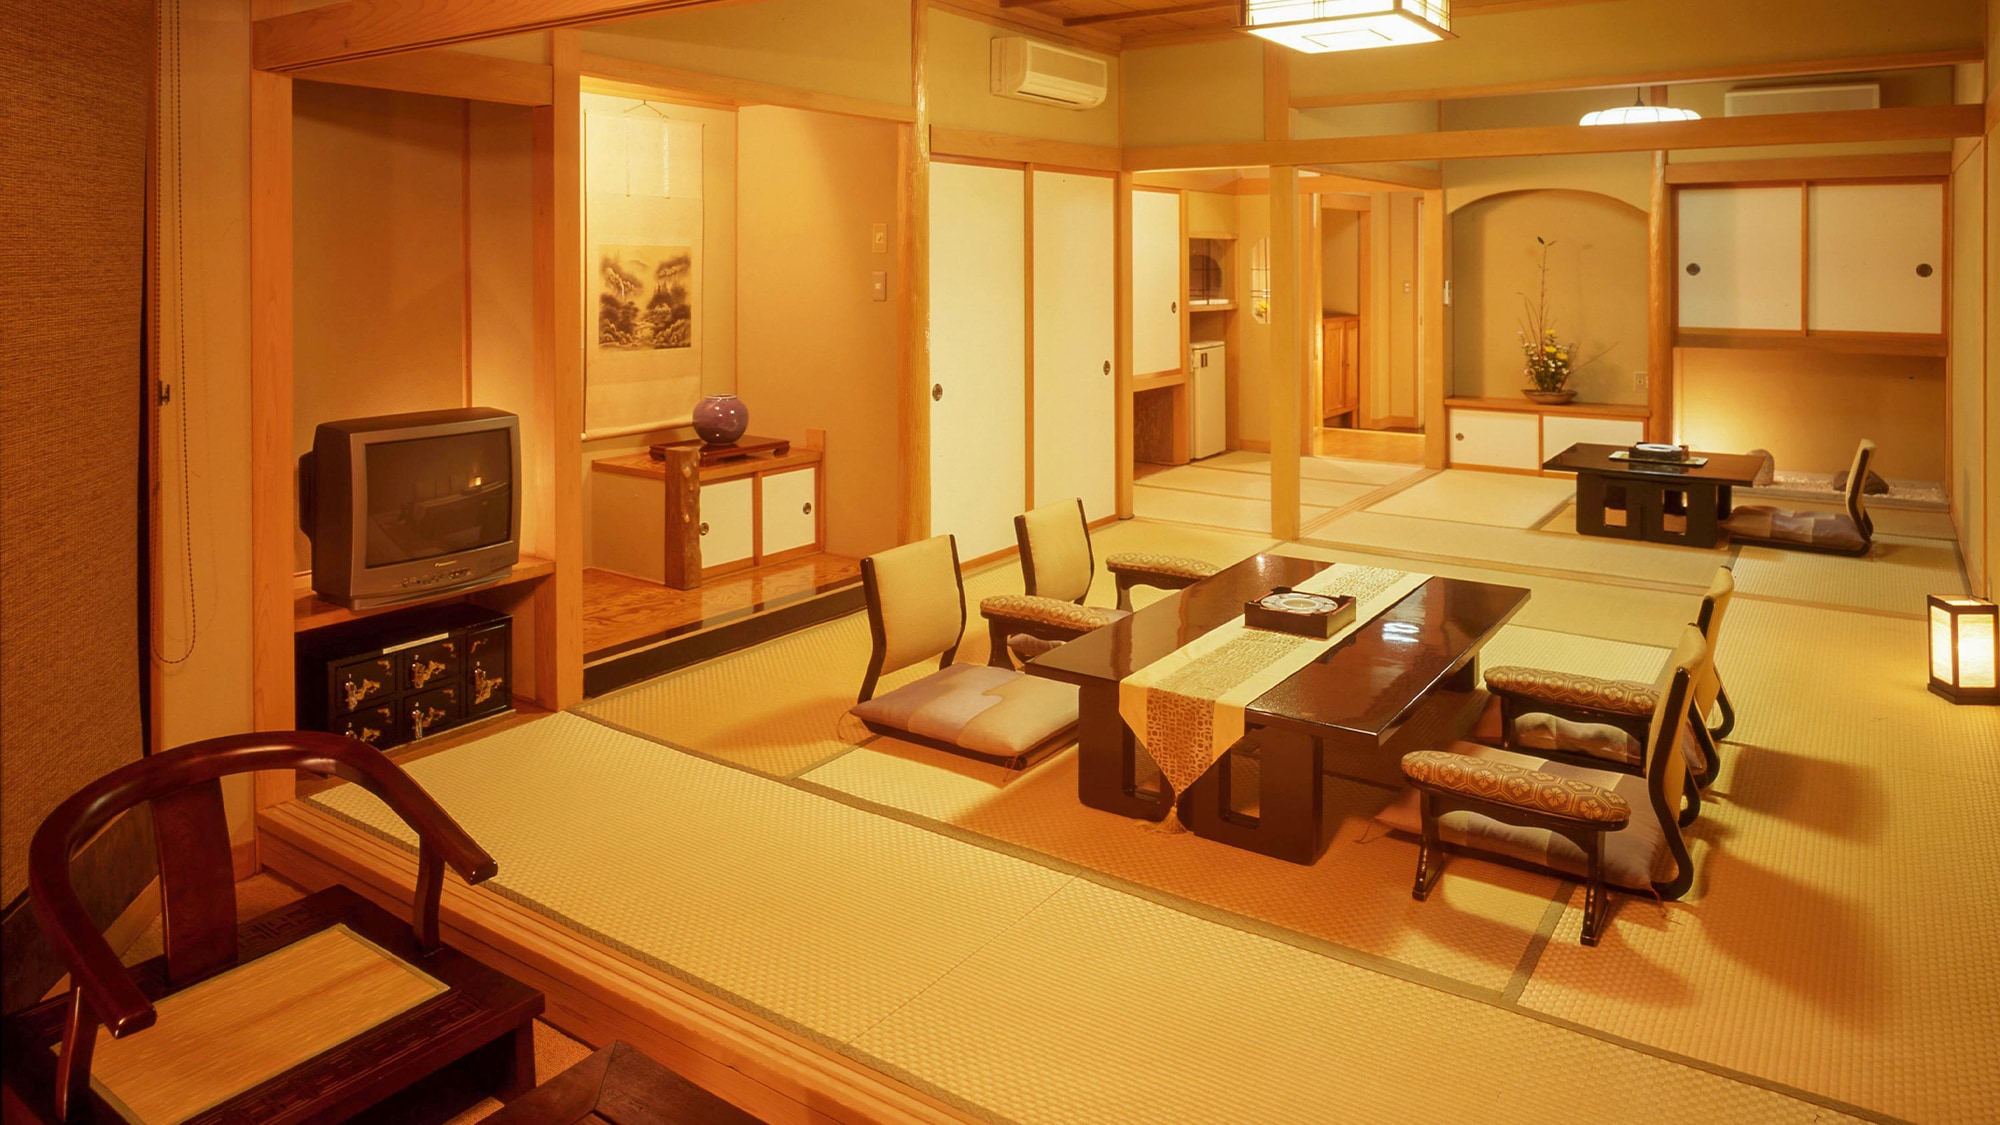 ■Deluxe Japanese-style room 10 tatami mats + 4.5 tatami mats｜Spend a relaxing time in a room with 10 tatami mats and 4.5 tatami mats